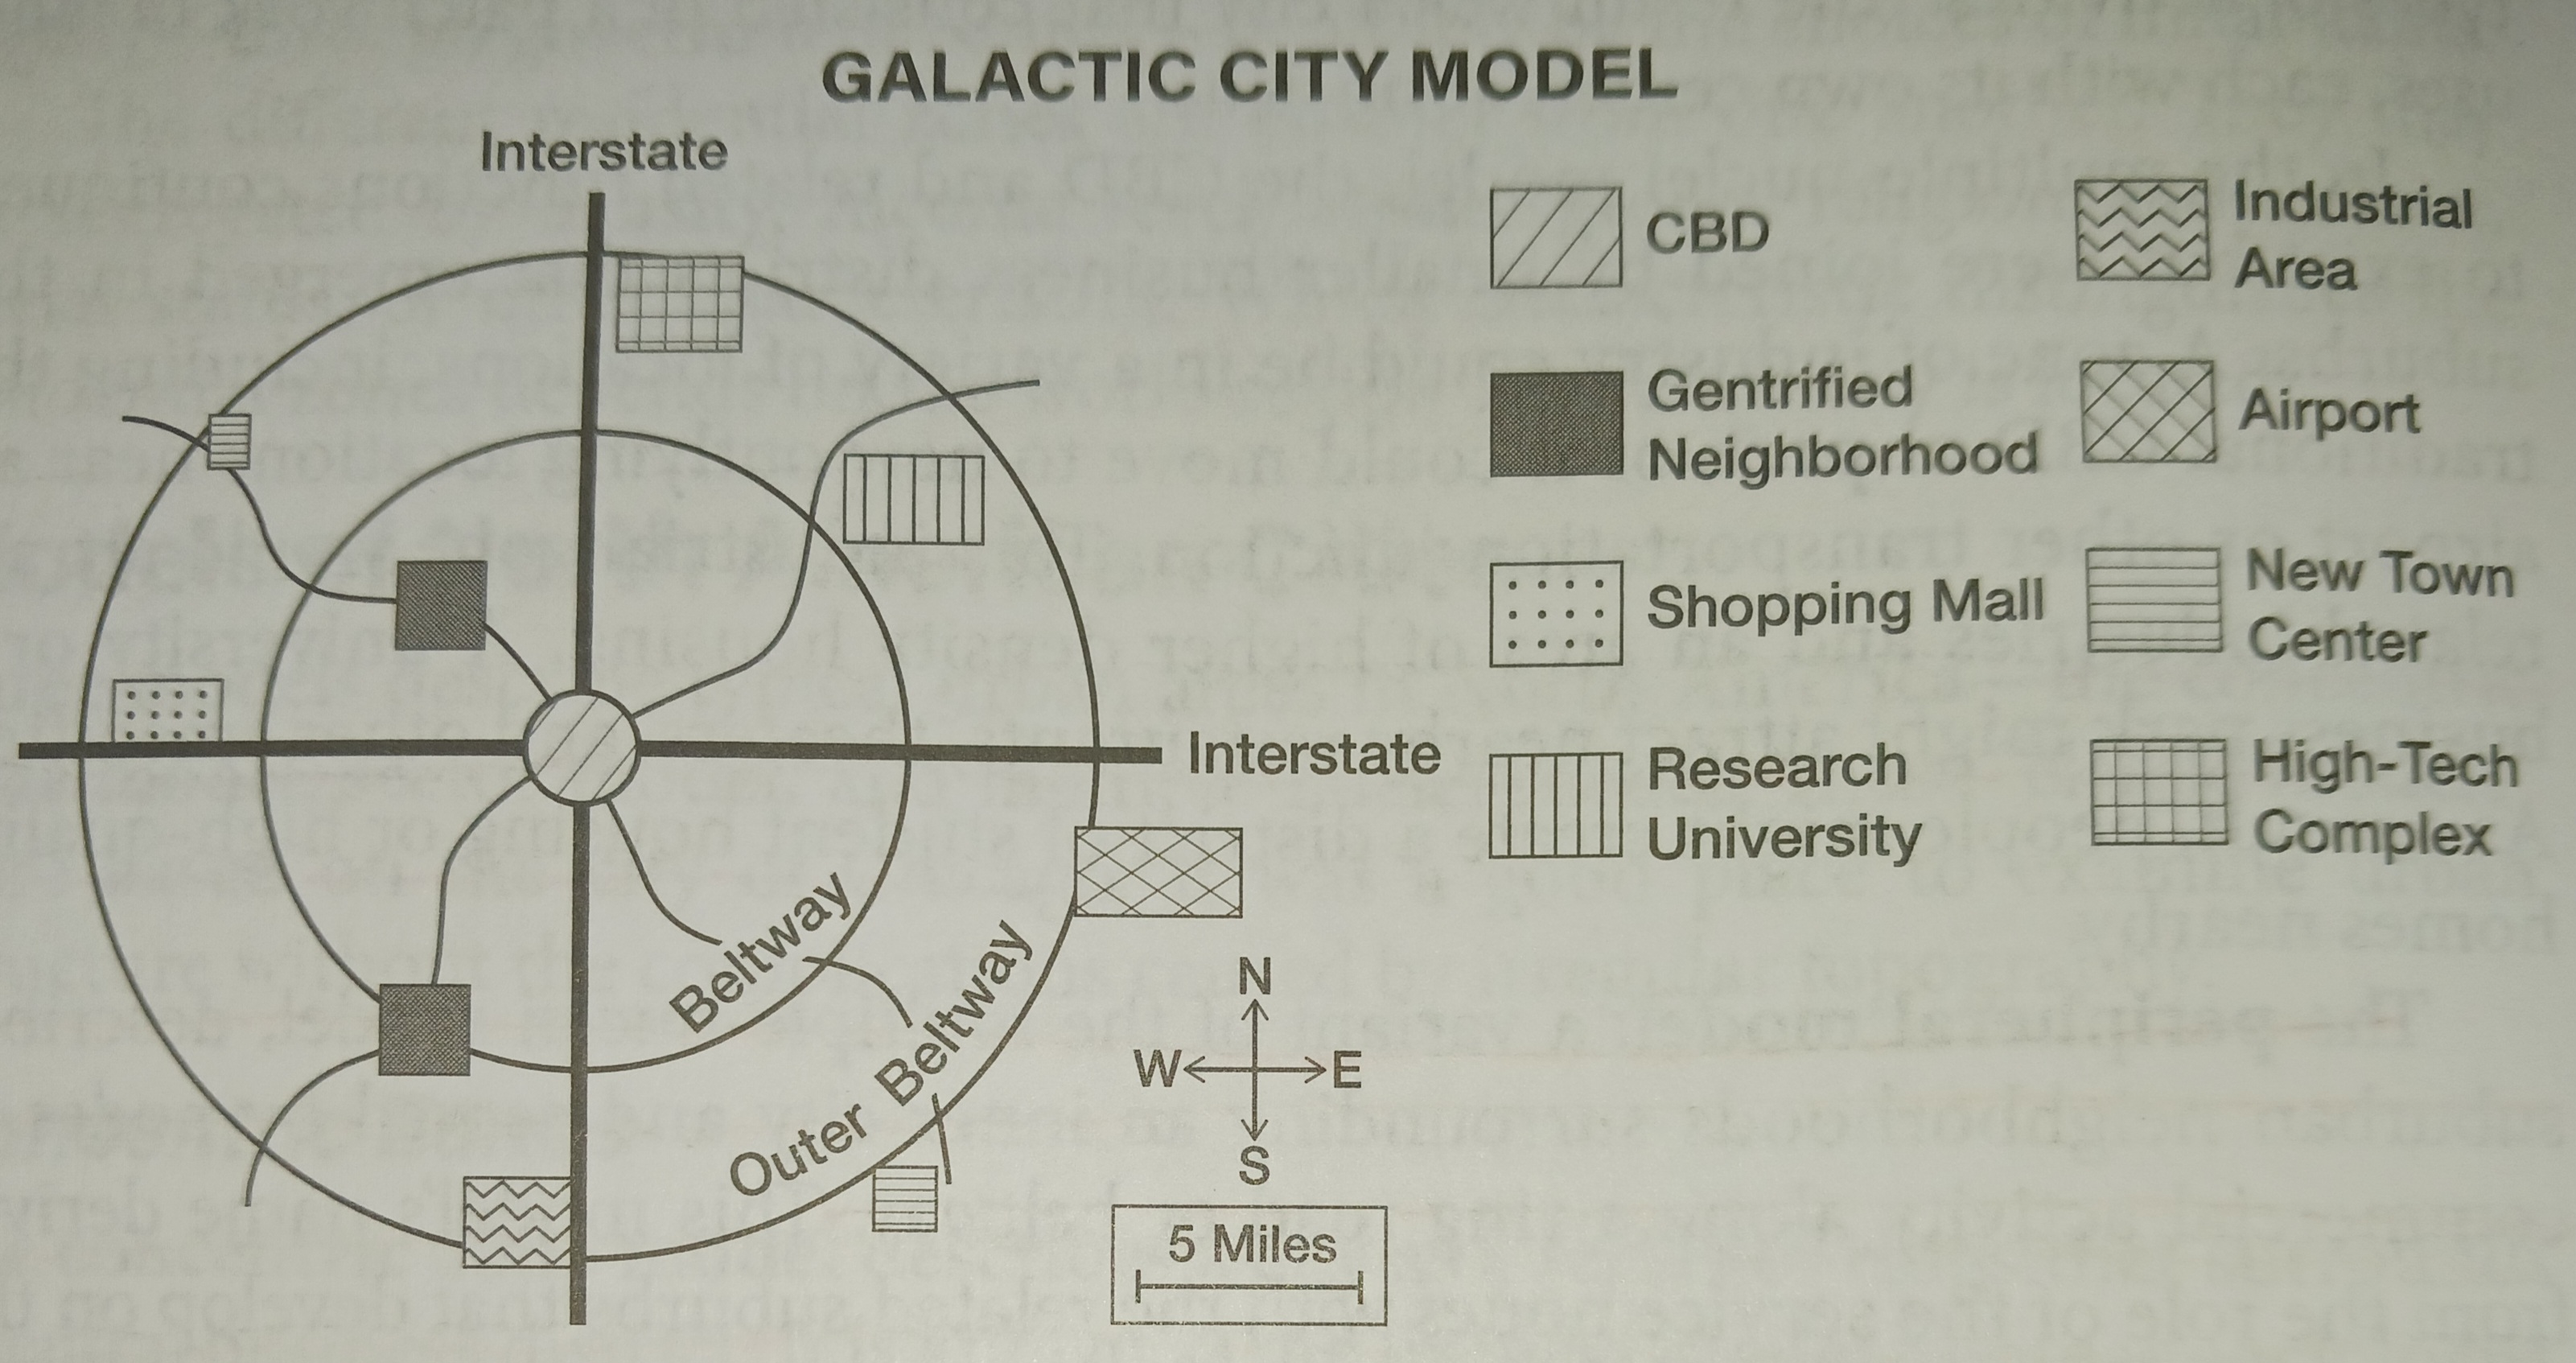 <p>1. <strong>Misinterpretation as Multiple-Nuclei Model Extension:</strong> Some critics mistake the Galactic City Model as merely an expansion of the Multiple-Nuclei Model or see it as interchangeable with concepts like "edge cities." However, its creator, Peirce Lewis, clarified that it goes beyond these frameworks.</p><p>2. <strong>Different from Megalopolis:</strong> While the term "megalopolis" describes a continuous urban area stretching from Maine to Virginia, the Galactic City Model encompasses various types of cities, not just one type of urban form. Lewis emphasized this distinction.</p><p>3. <strong>Critique of "Sprawl" Terminology:</strong> Lewis criticized the term "sprawl" for its negative connotations, as it implies that urban expansion outside traditional cores is unnatural. Instead, he aimed to convey that this urban form has become synonymous with the US itself, reflecting its widespread nature.</p>